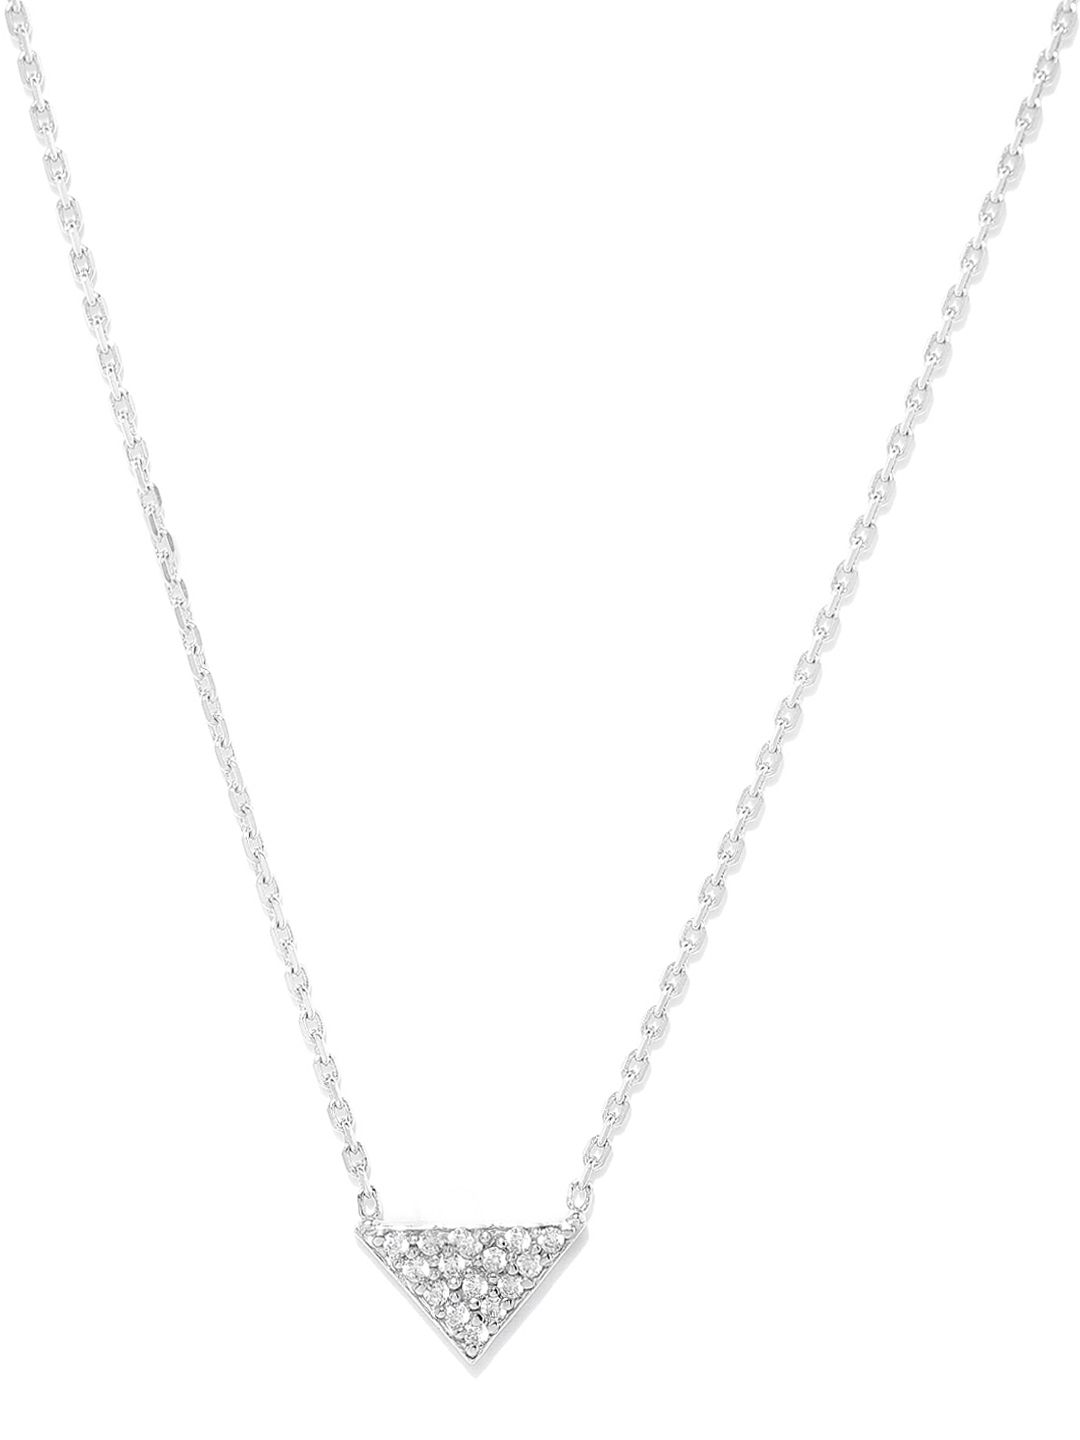 Carlton London Silver Toned Rhodium-Plated CZ Studded Necklace Price in India